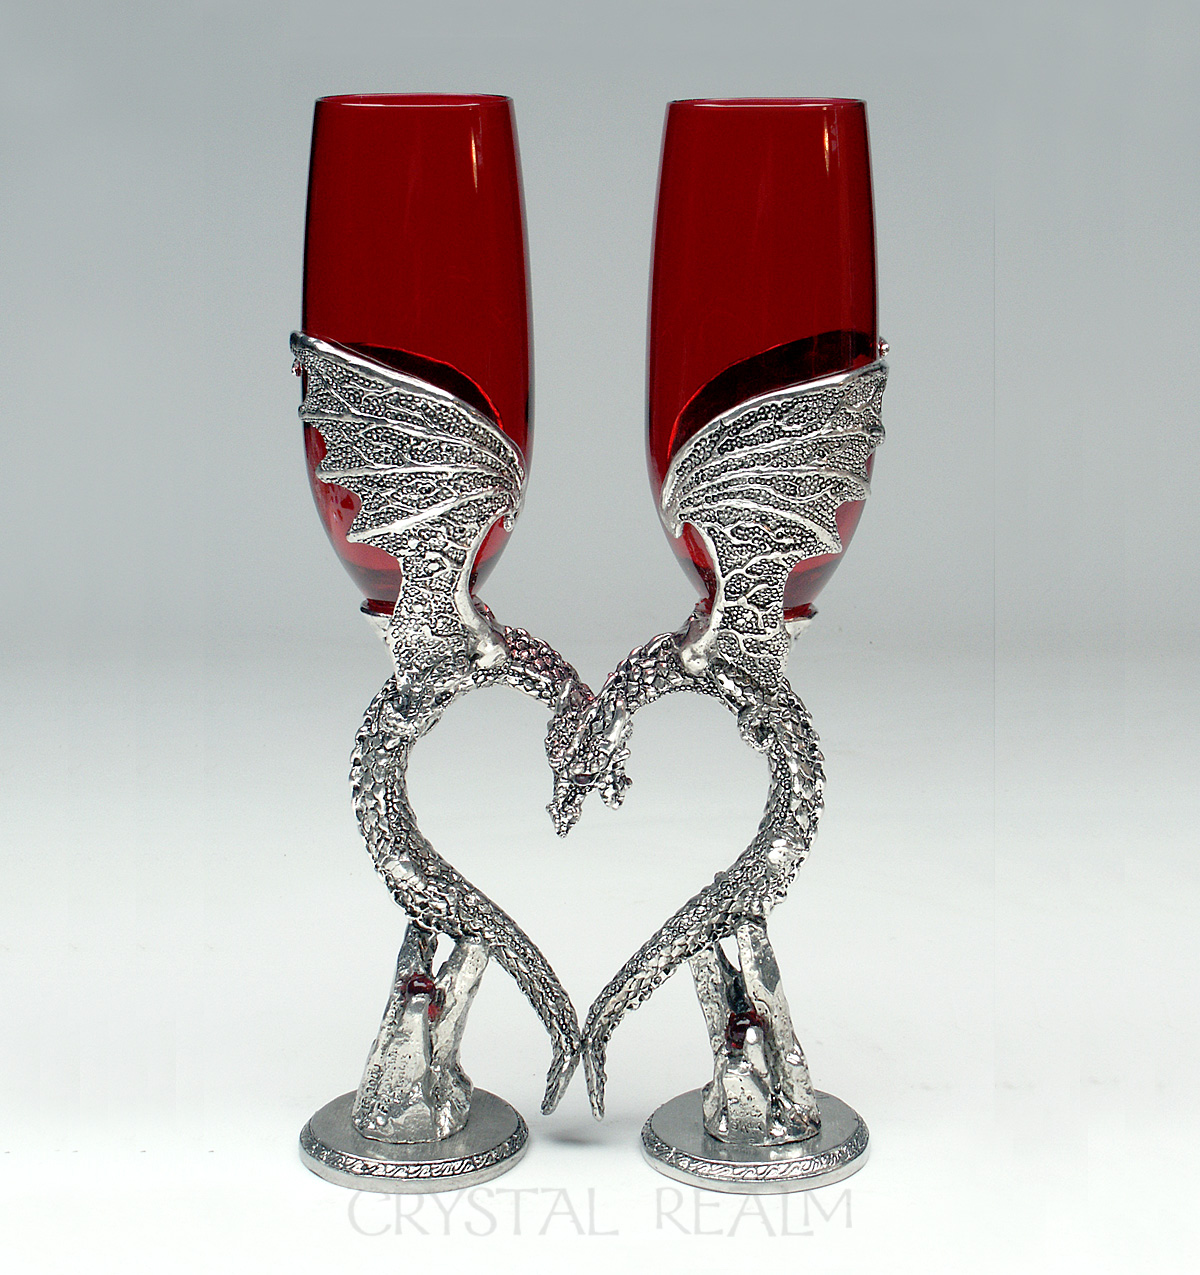 Ruby red toasting glasses held by dragons forming a heart